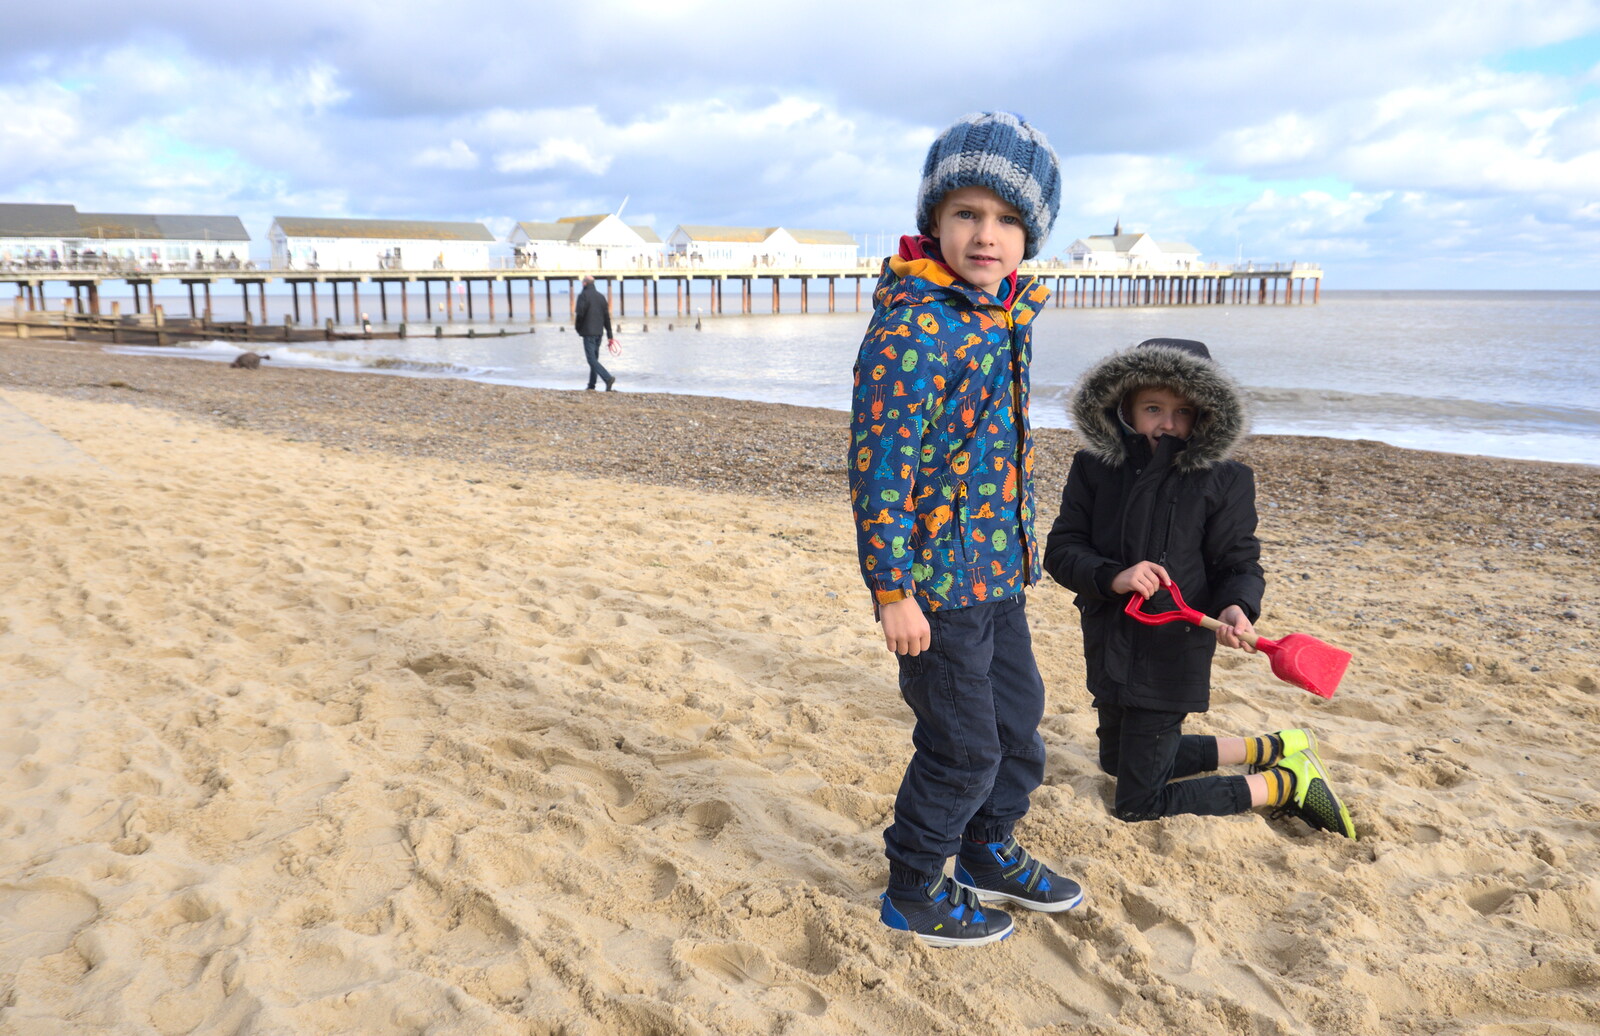 Harry and Fred on the beach at Southwold from A Trip to the Amusements, Southwold Pier, Southwold, Suffolk - 5th November 2017